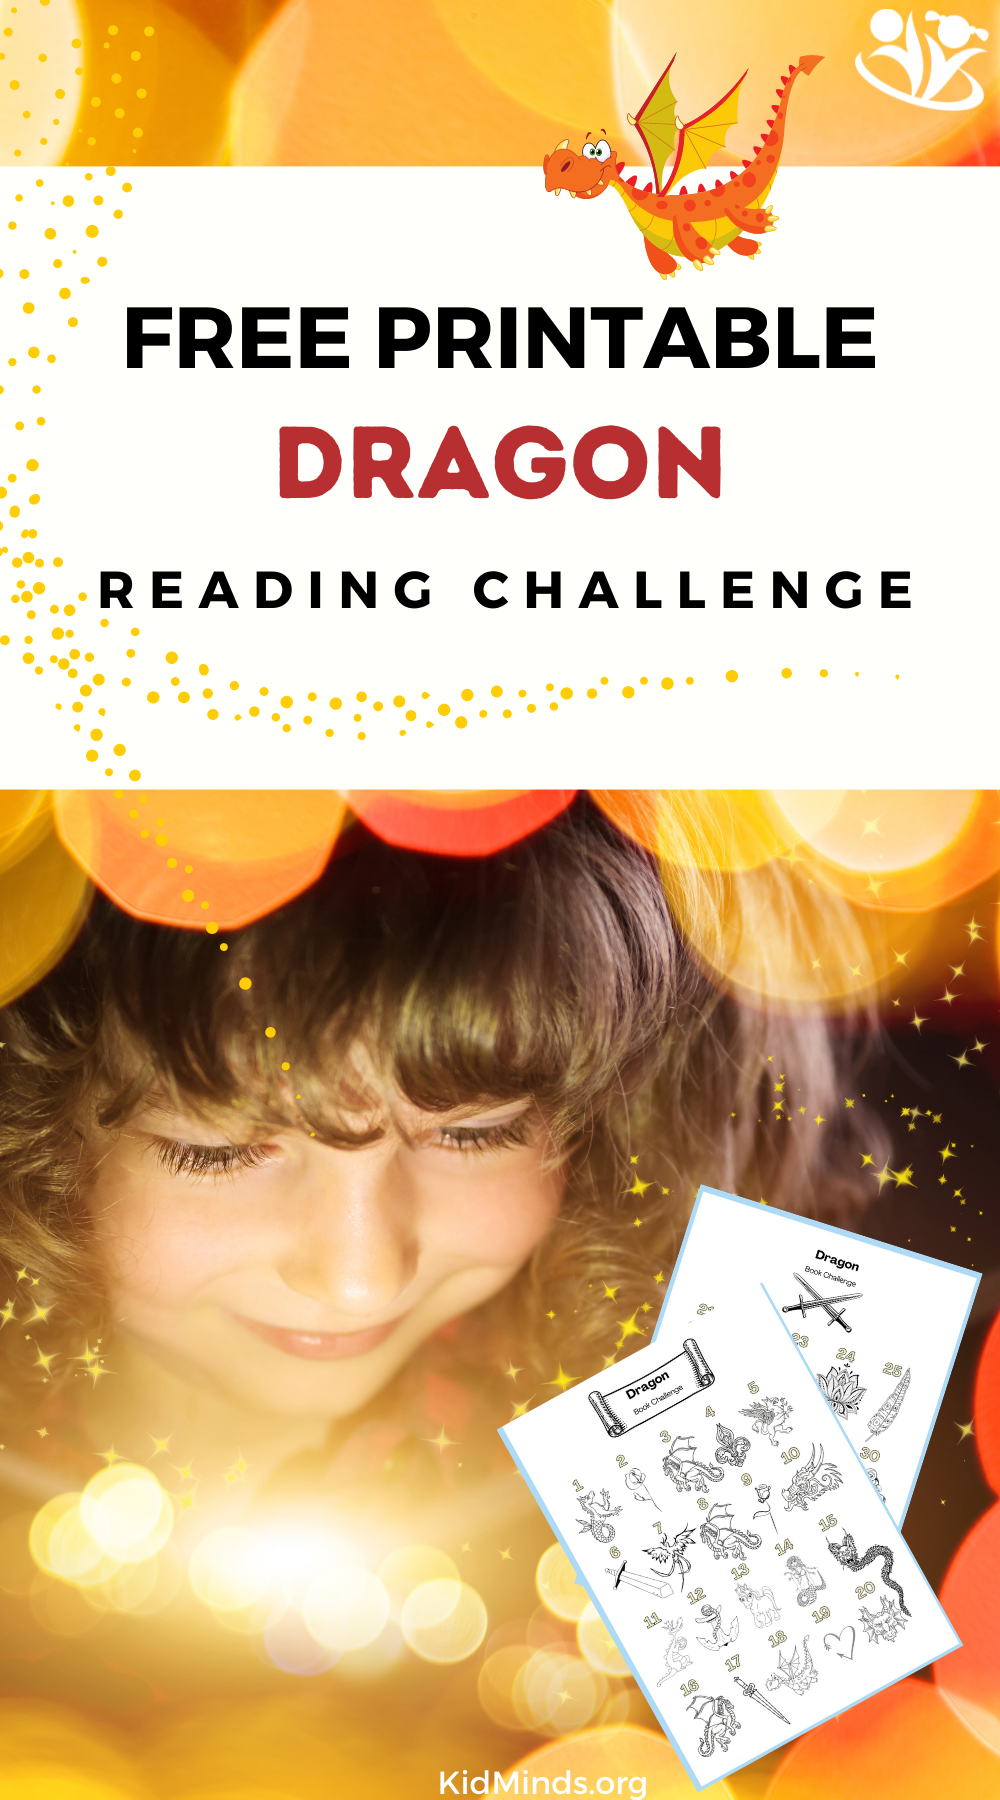 This Dragon Reading Challenge is a fantastic way to build reading discipline and gain momentum for the new year.  #raisingreaders #January #dragonday #books4kids